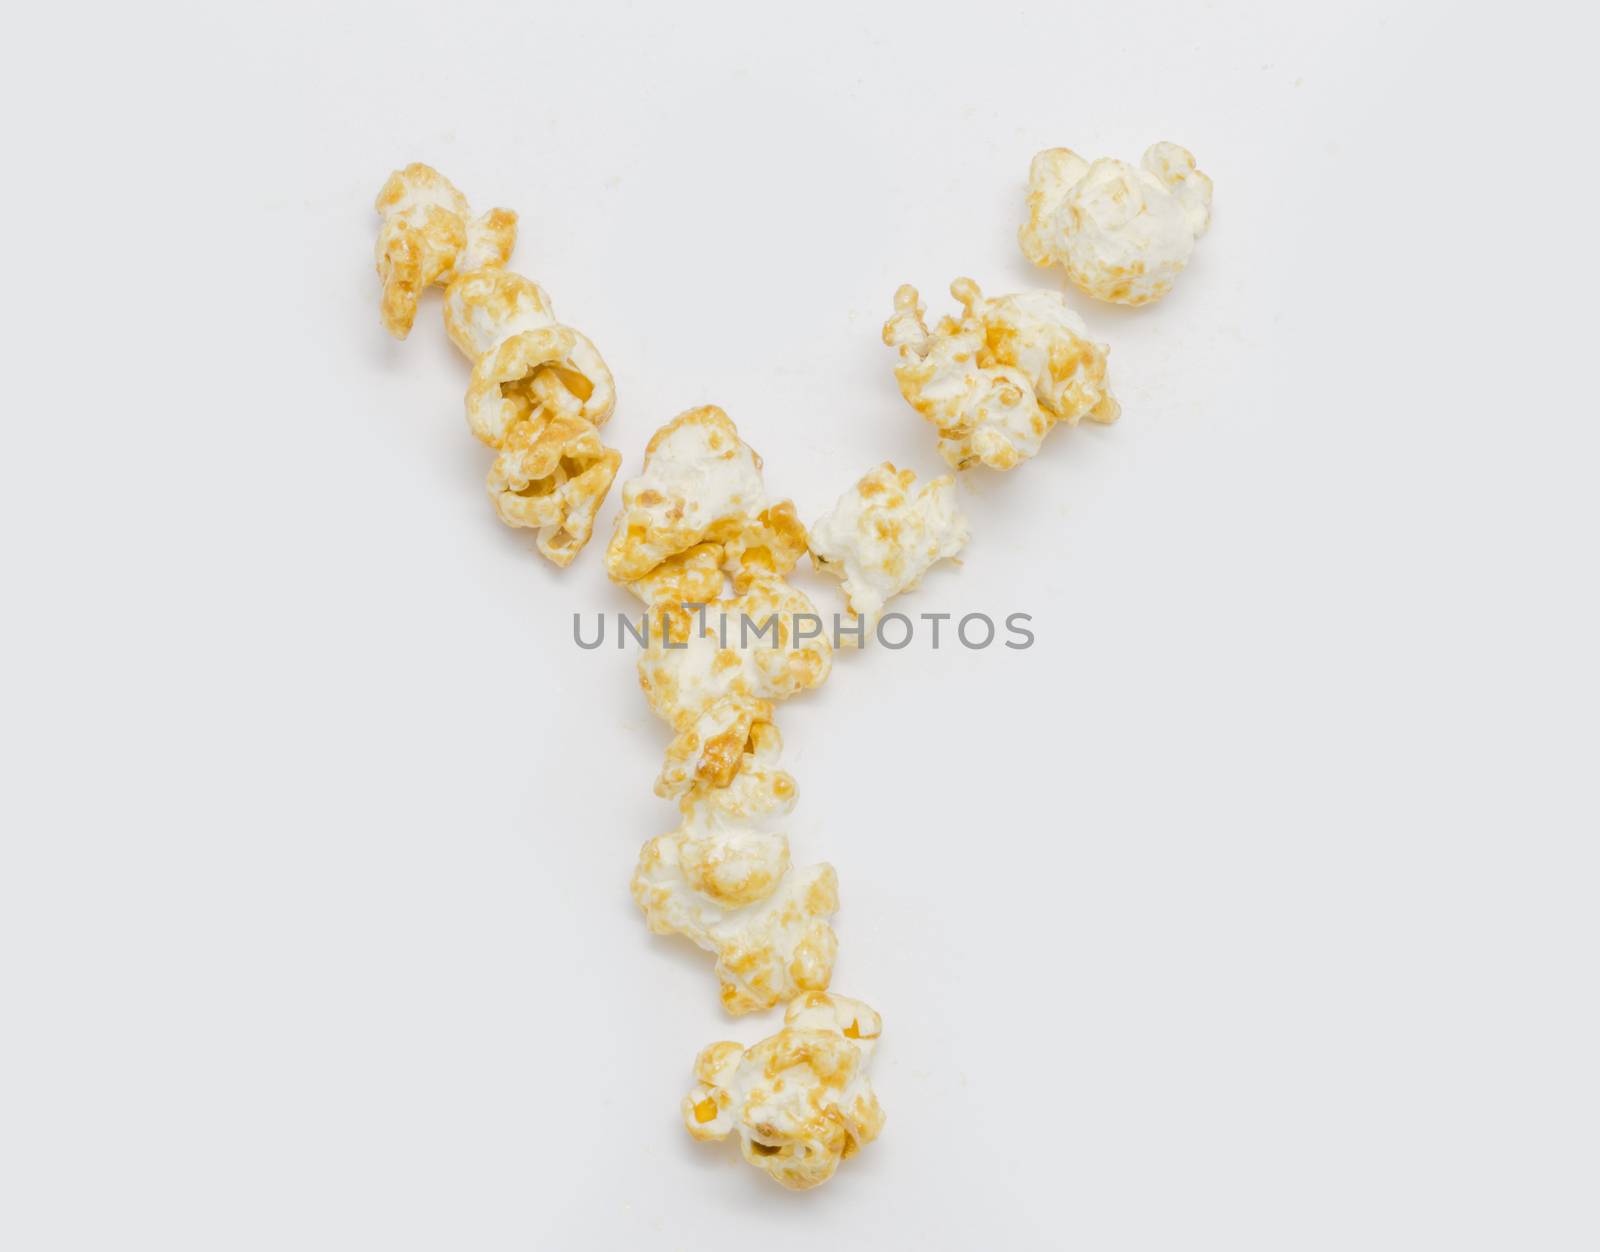 pop corn forming letter Y isolated on white background